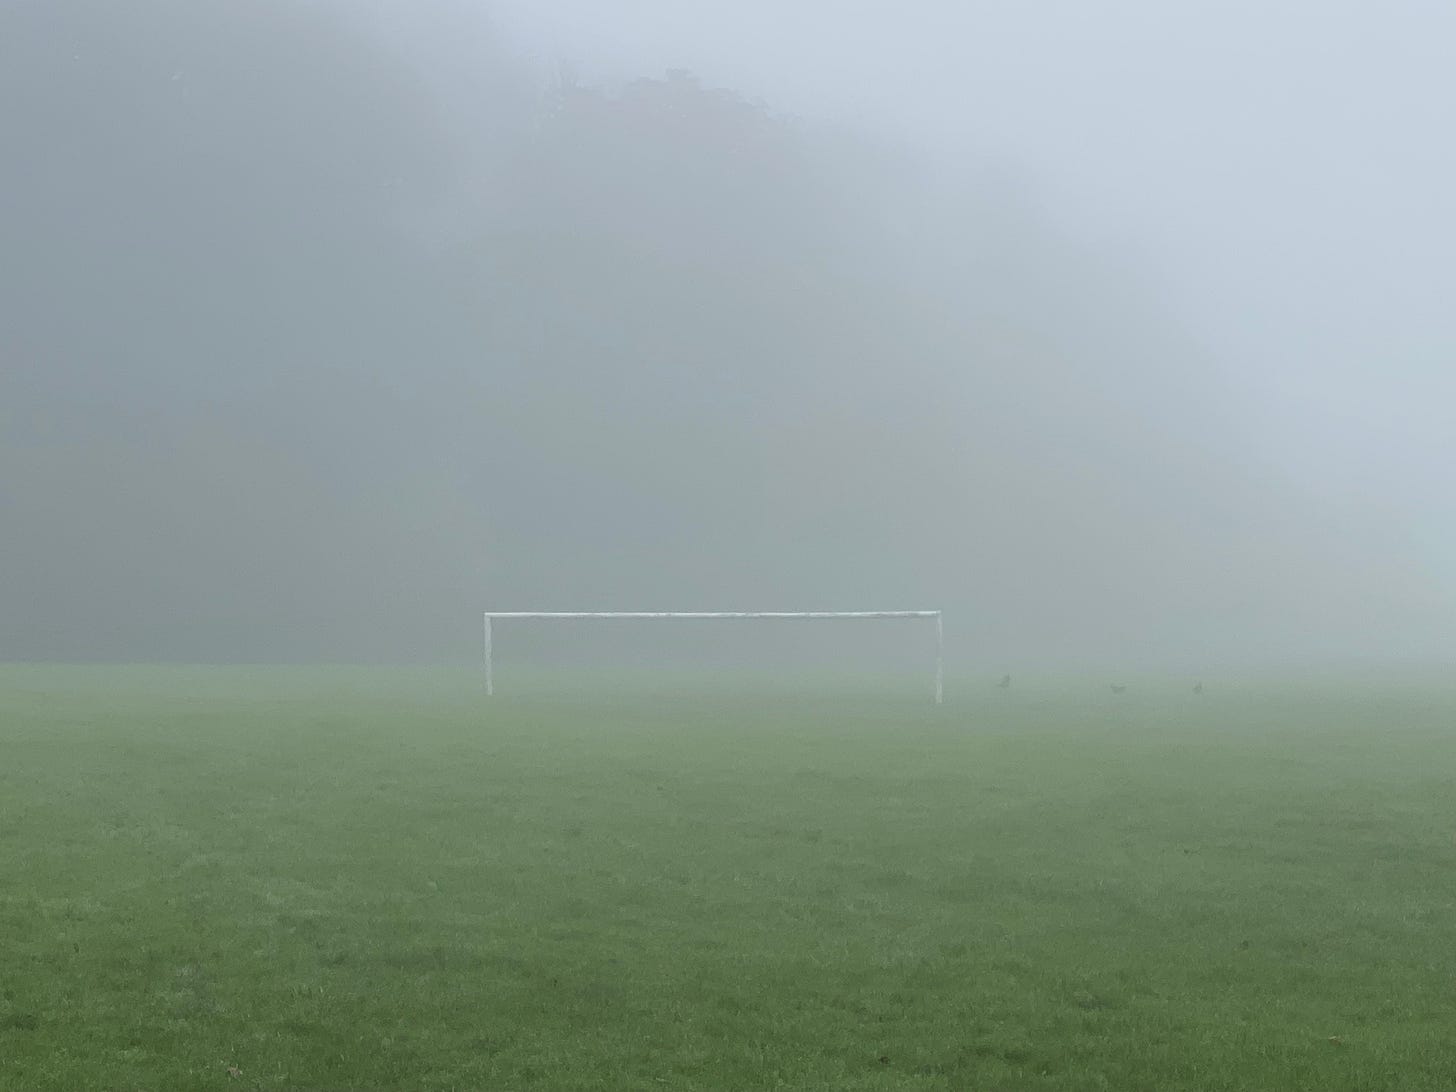 set of white goal posts in a foggy field - green, white and grey